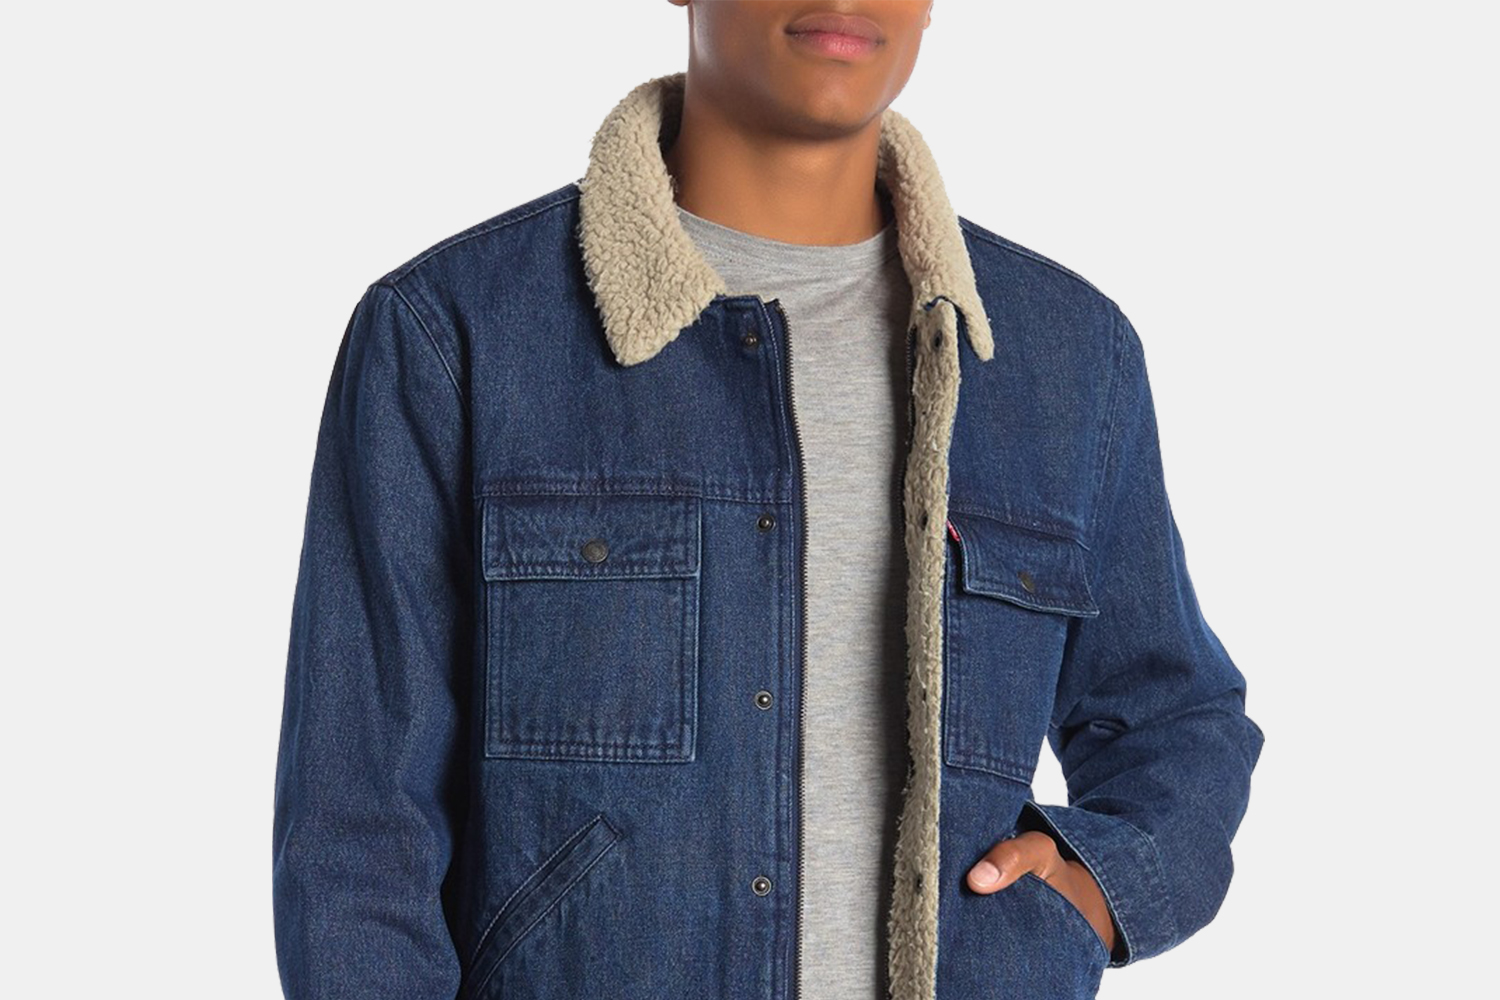 Levi's Sherpa-Lined Jackets Are 60% Off 